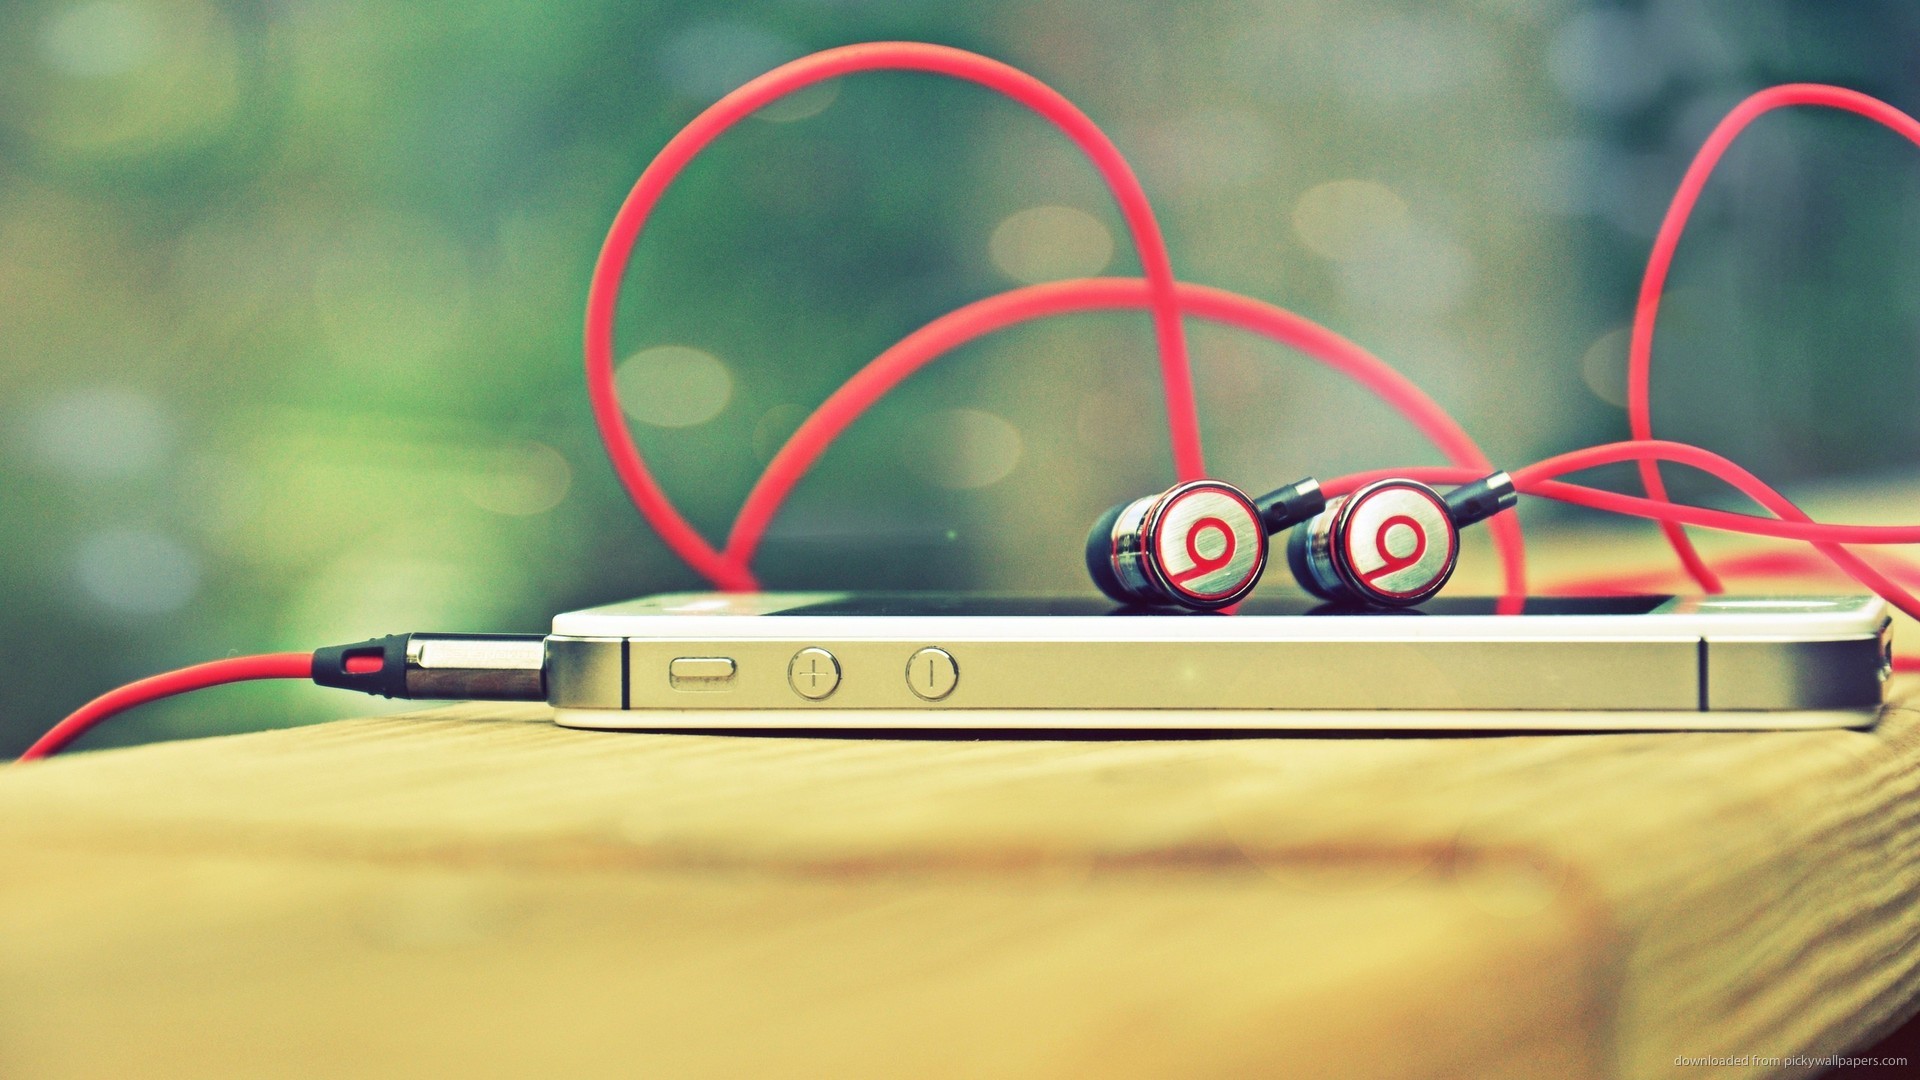 1920x1080 HD iPhone 4S with Beats wallpaper